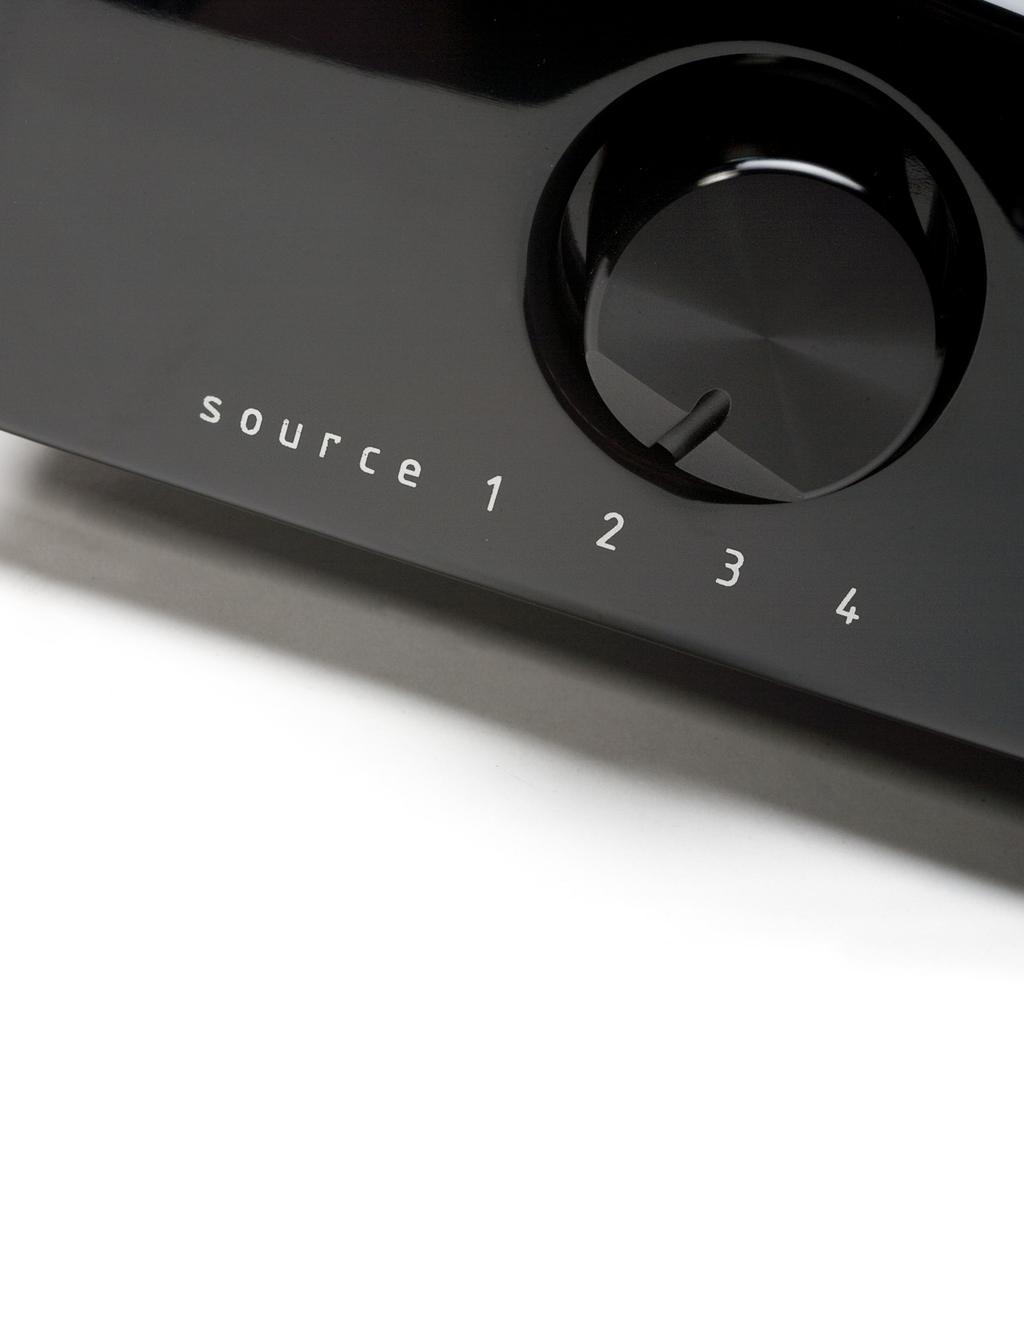 ISSUE 17 2008 Mystère ia21 integrated amplifier By Marc Phillips I t still surprises me when I encounter people who don t know that Acura is merely the luxury marque of Honda, or